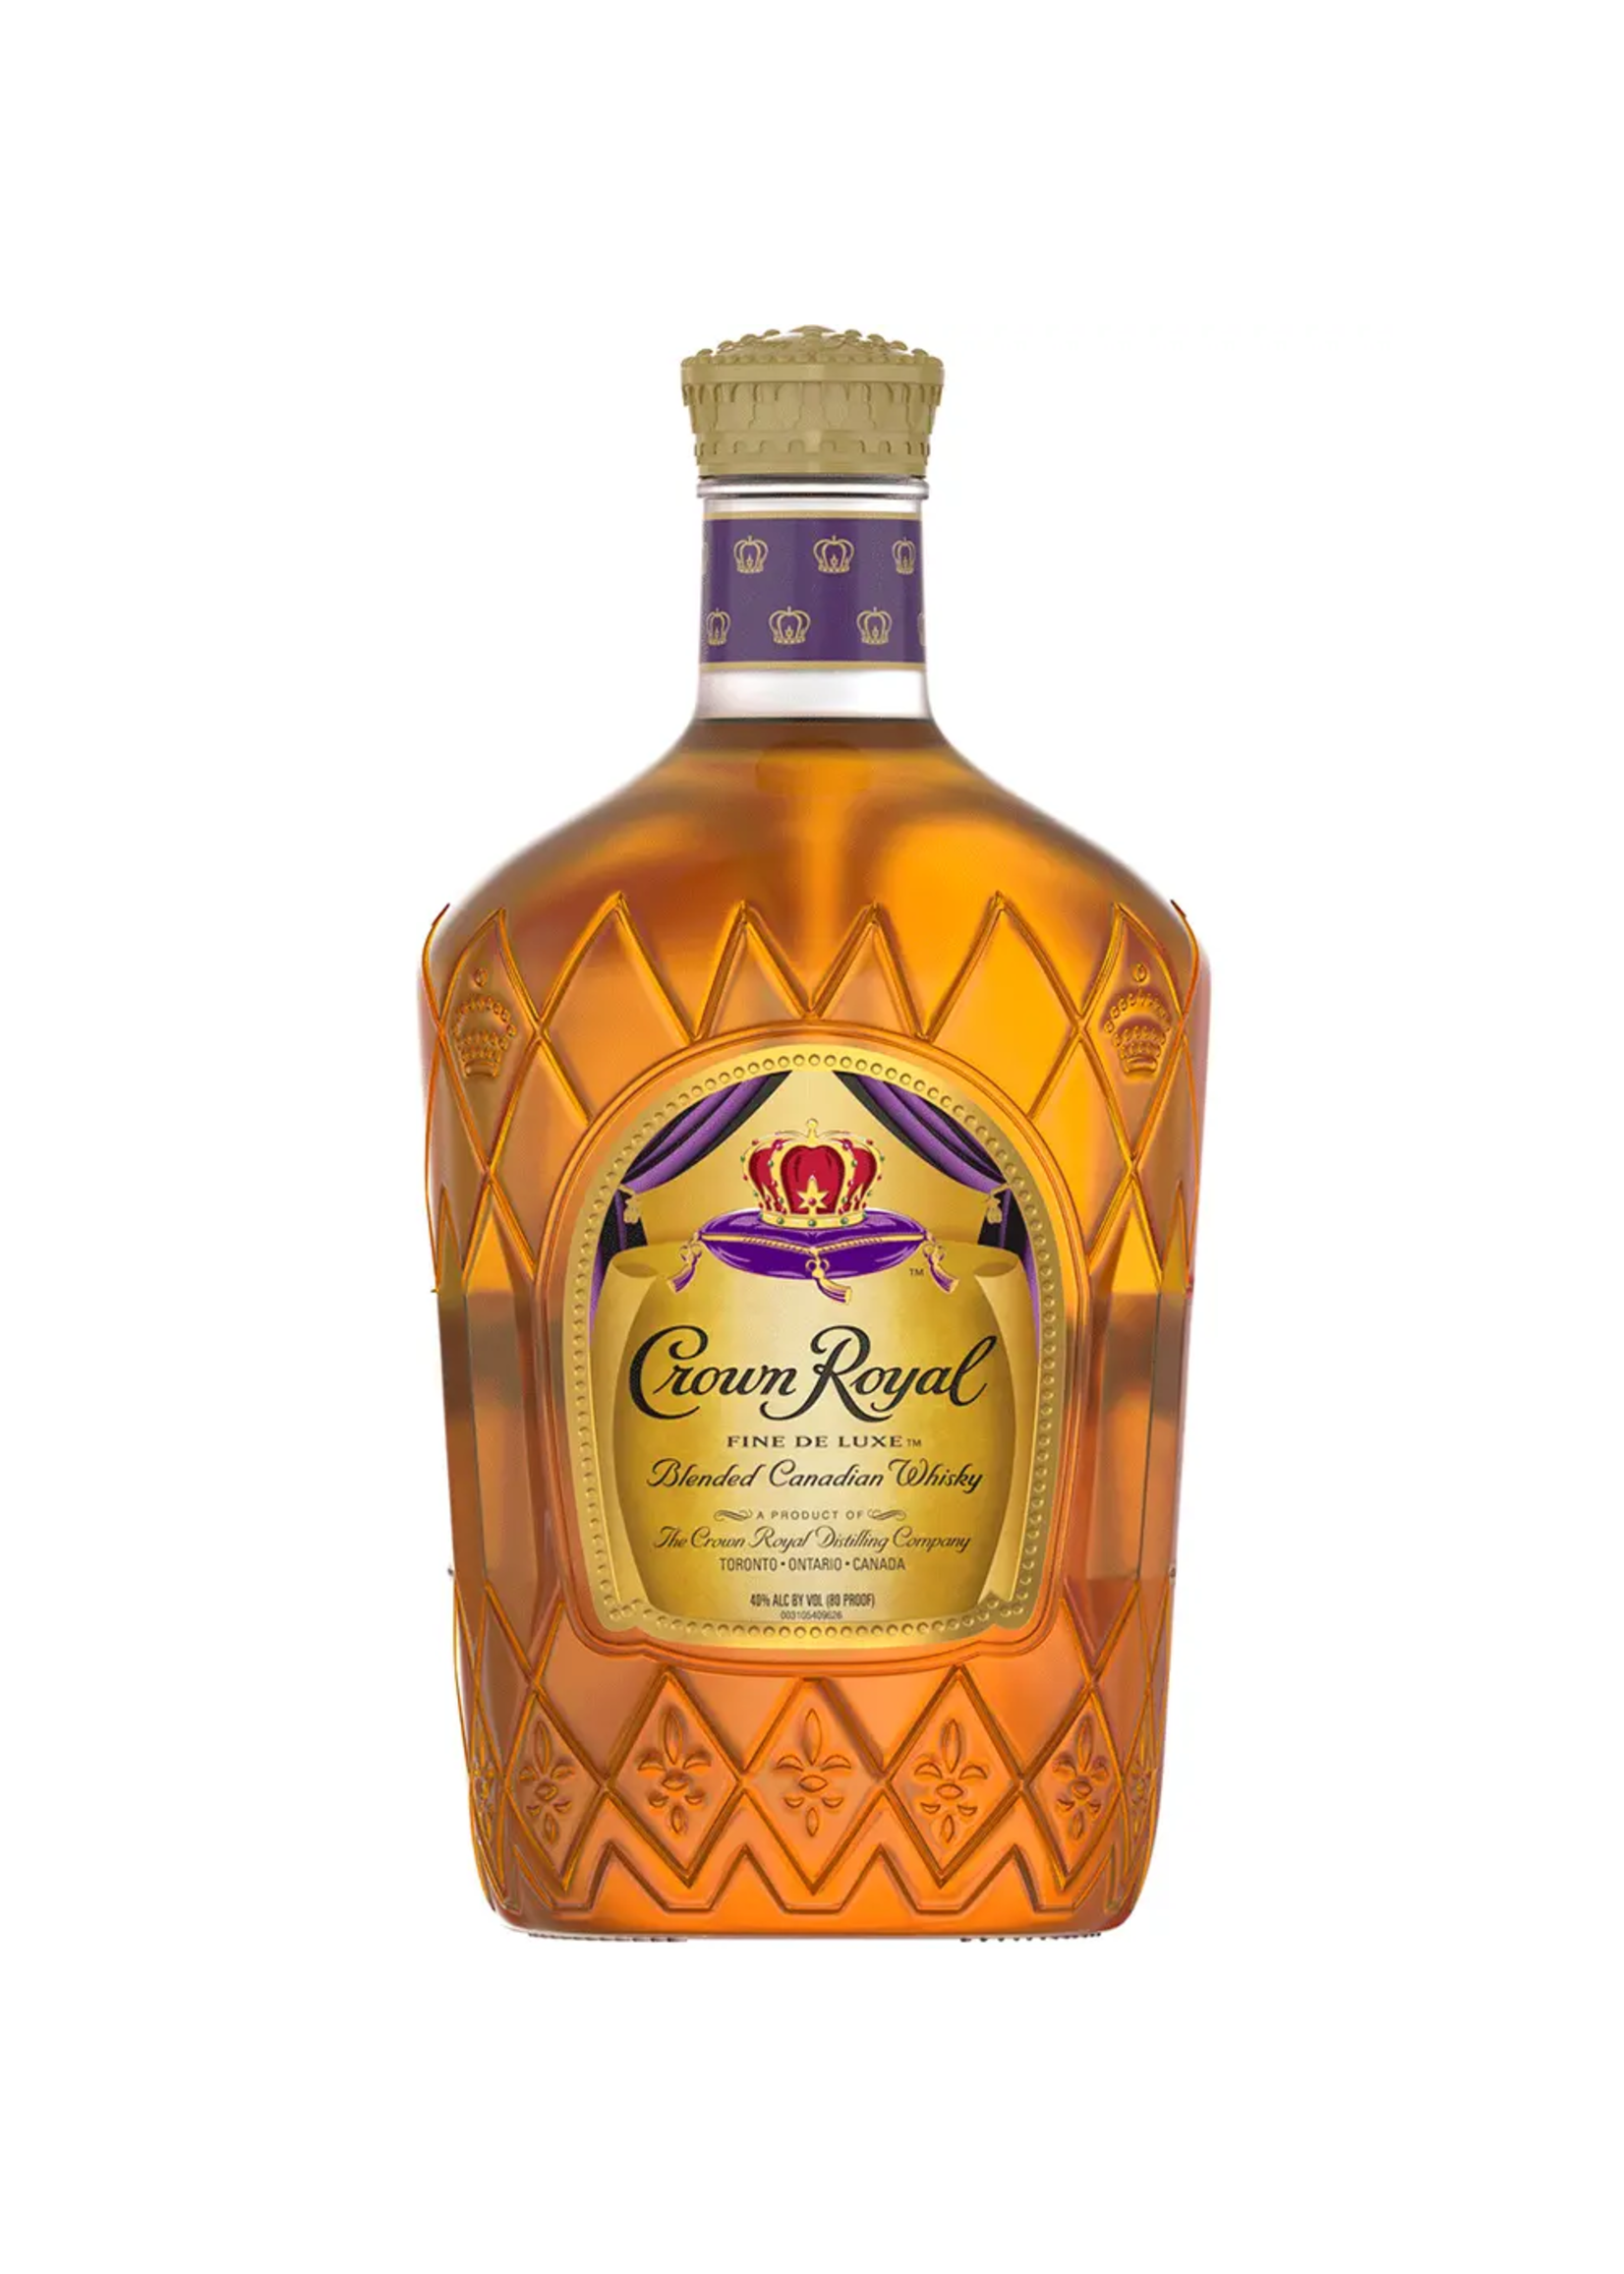 Crown Royal Crown Royal Canadian Whisky Fine Deluxe 80Proof 1.75 Ltr